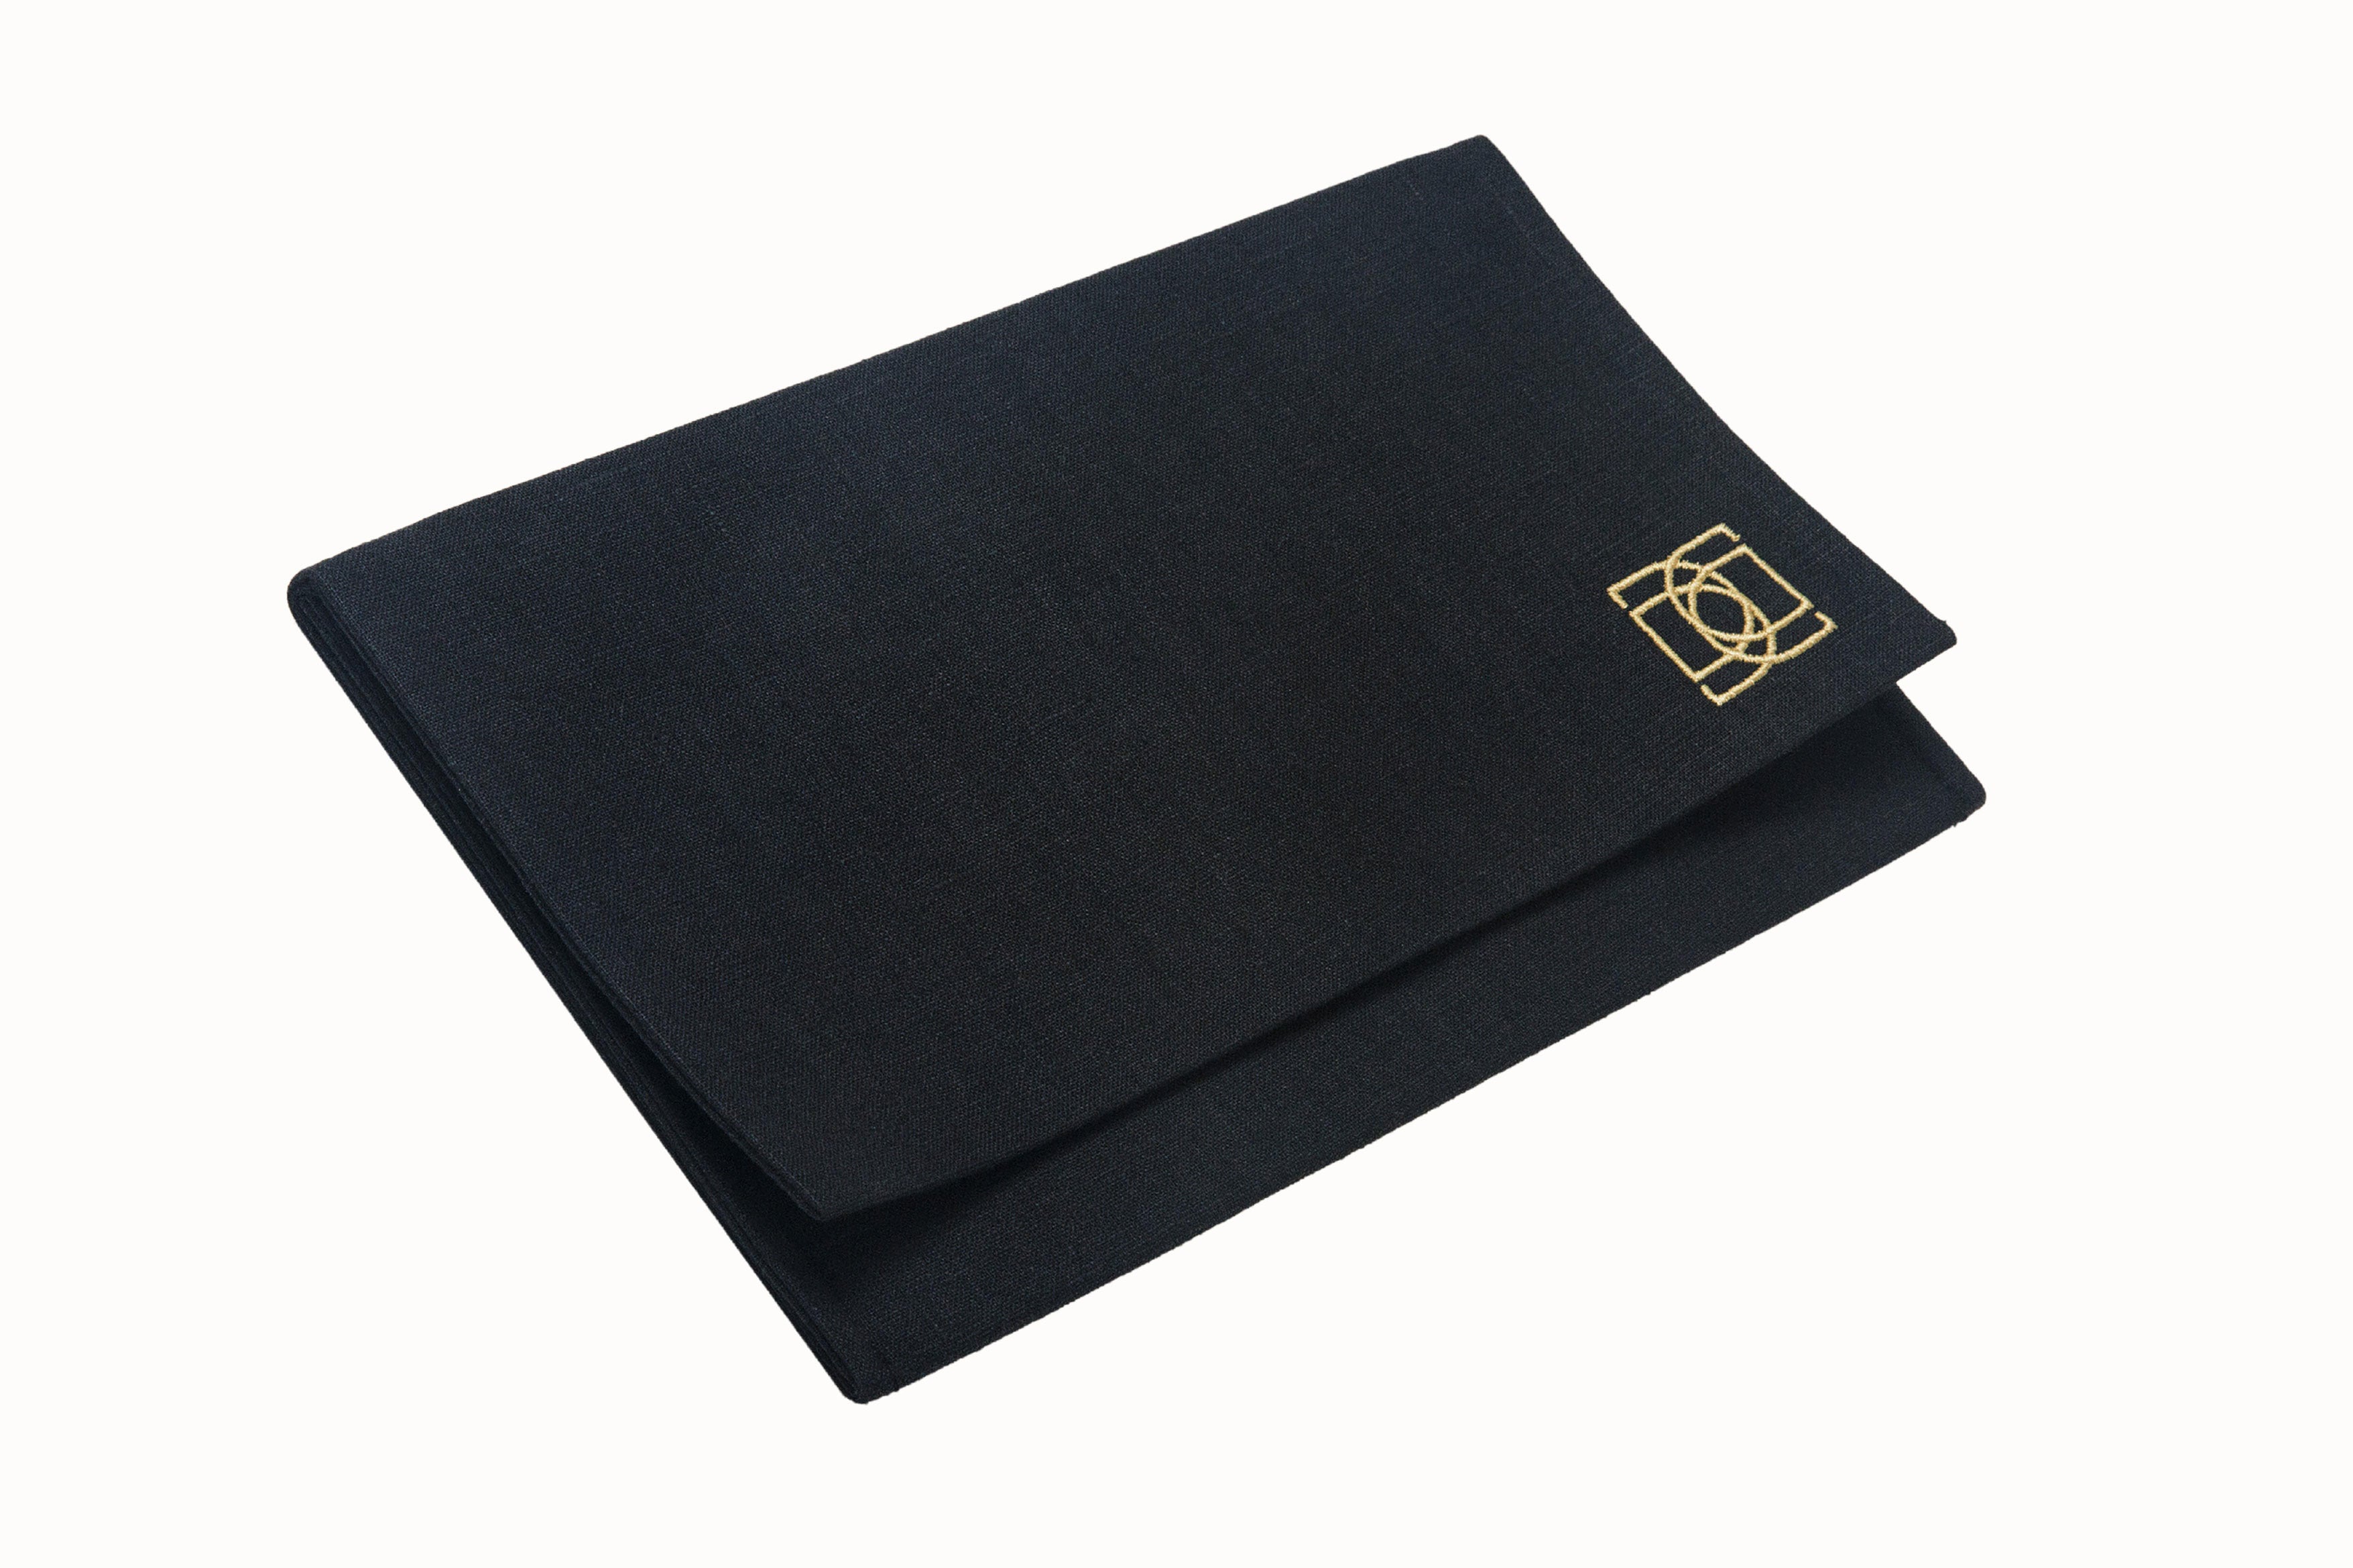 Image of our DESEDA scarf packaging. A rectangular envelope-style pouch made of 100% black linen and embroidered with our DESEDA Logo in a soft gold tone. Used for scarf storage and packaging for travel